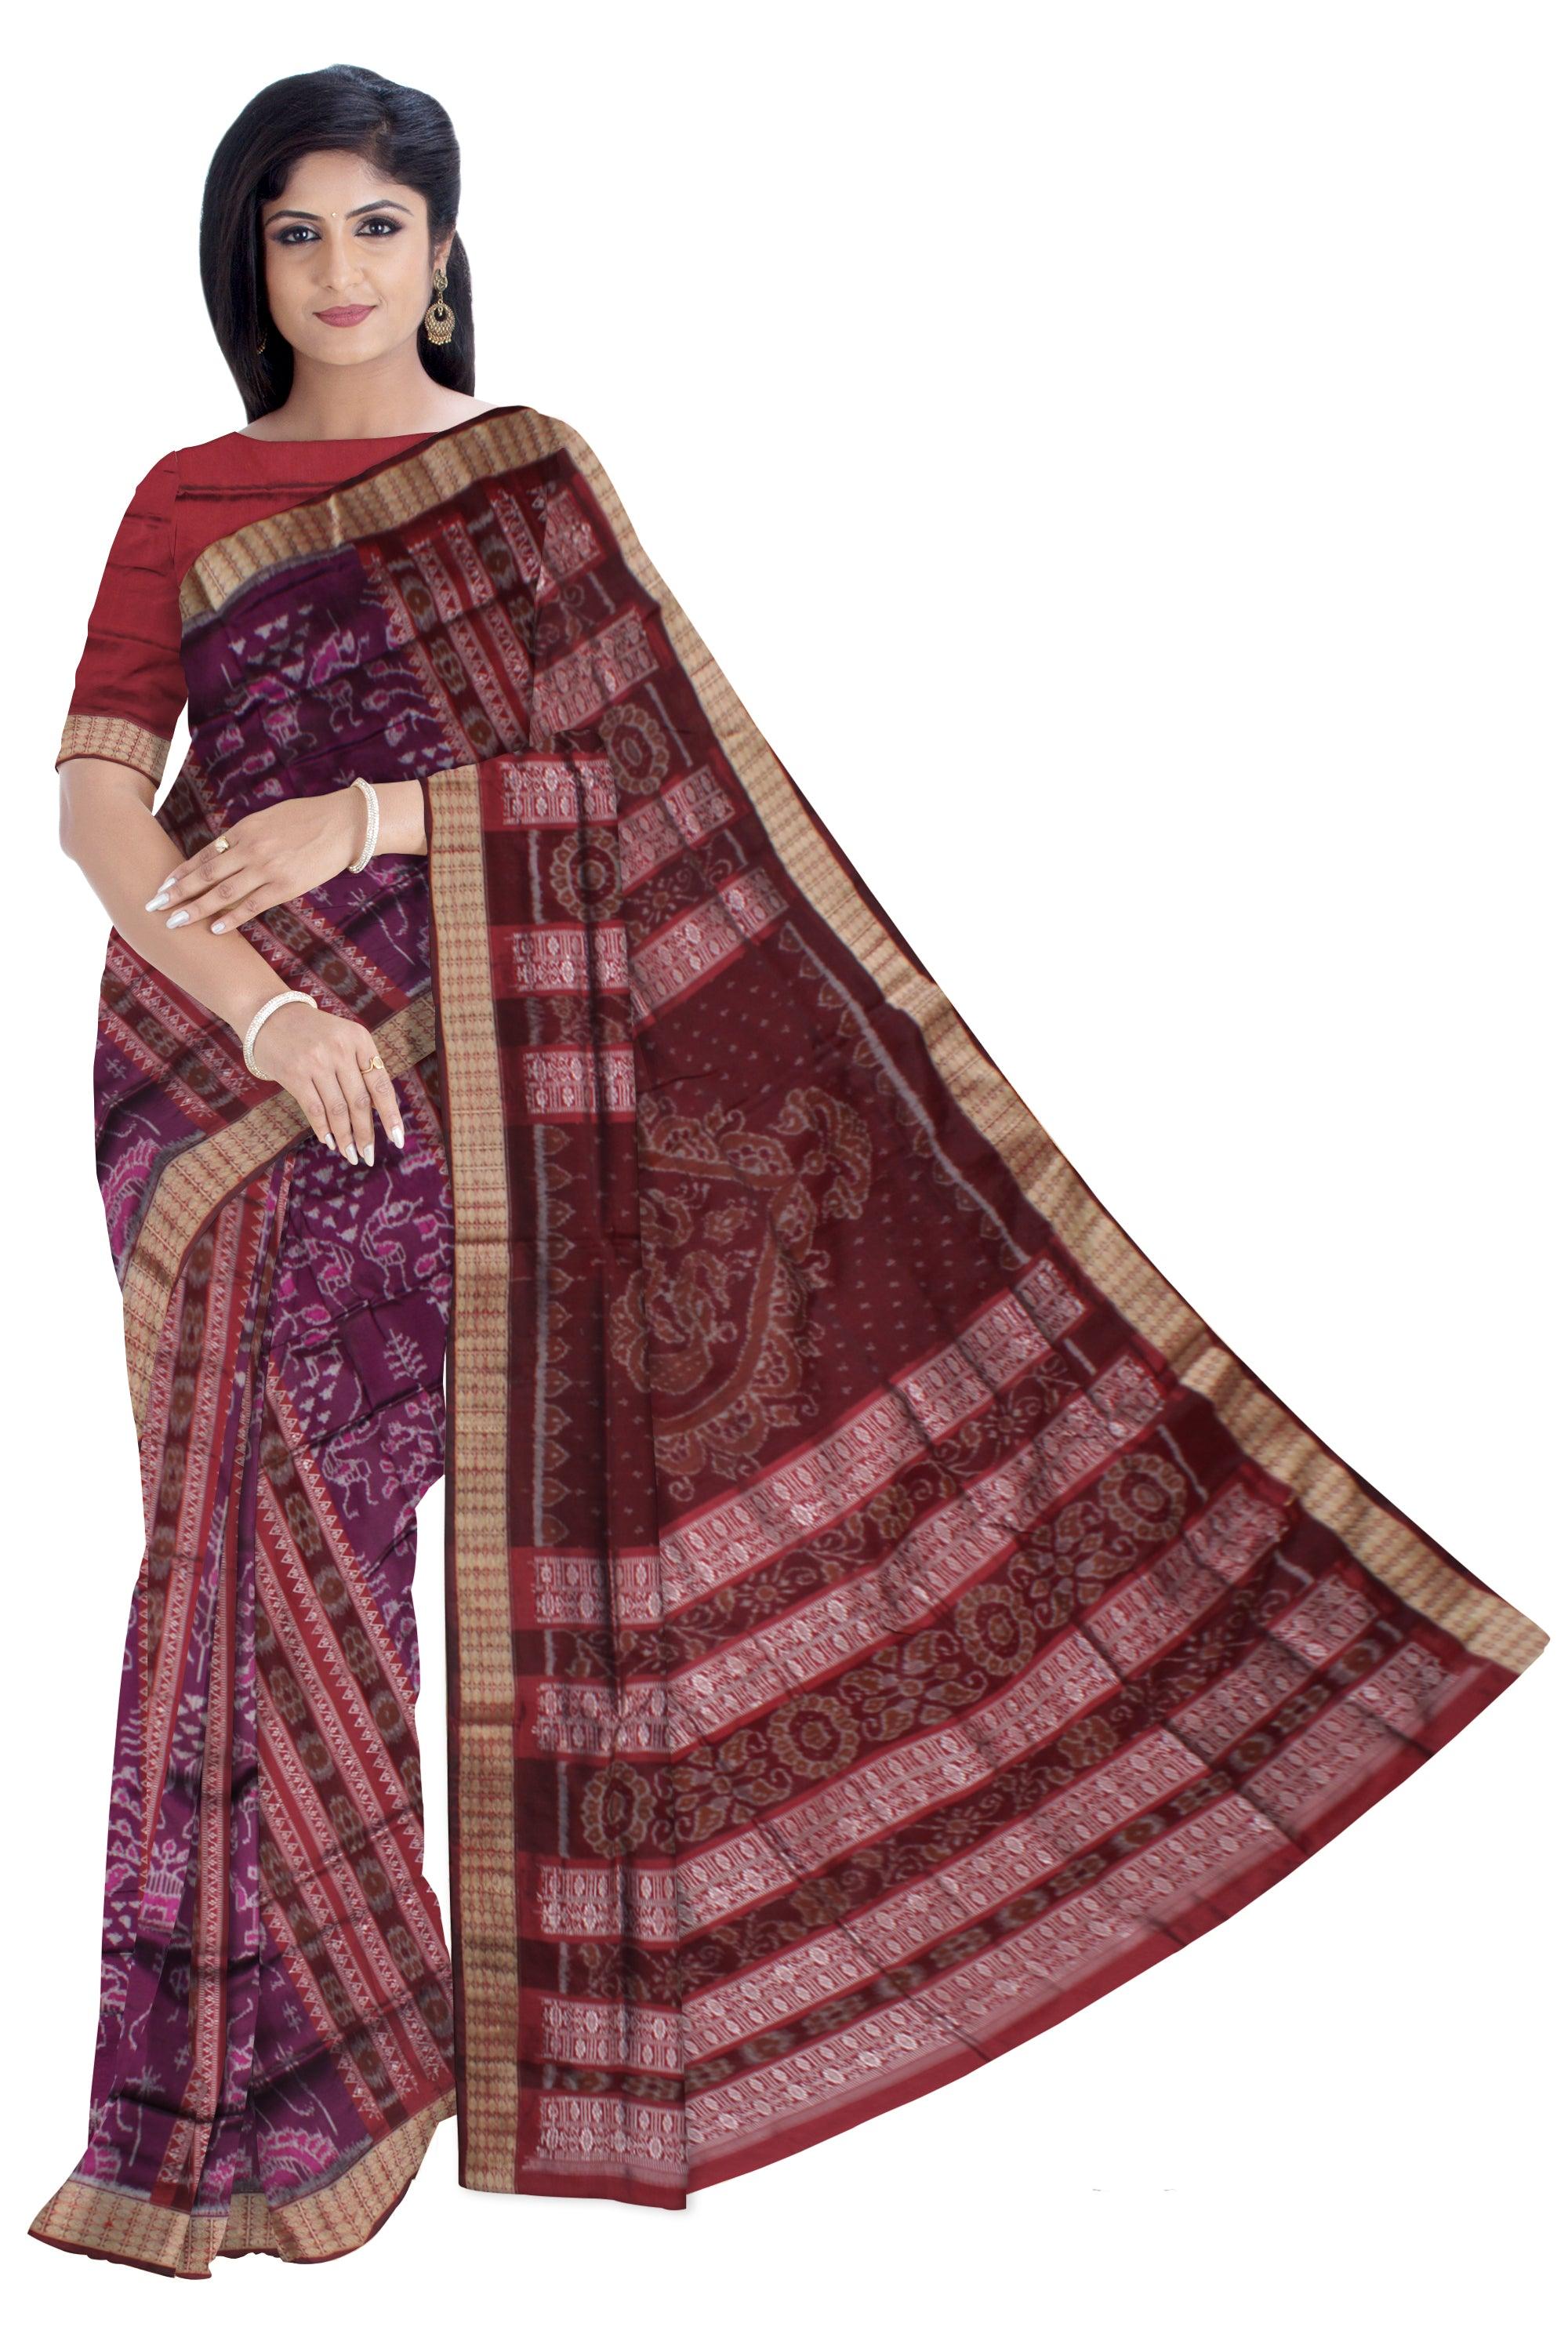 TRADITIONAL VILLAGE PATTERN SILK SAREE IS DARK PURPLE AND MAROON COLOR BASE,COMES WITH MATCHING BLOUSE PIECE. - Koshali Arts & Crafts Enterprise